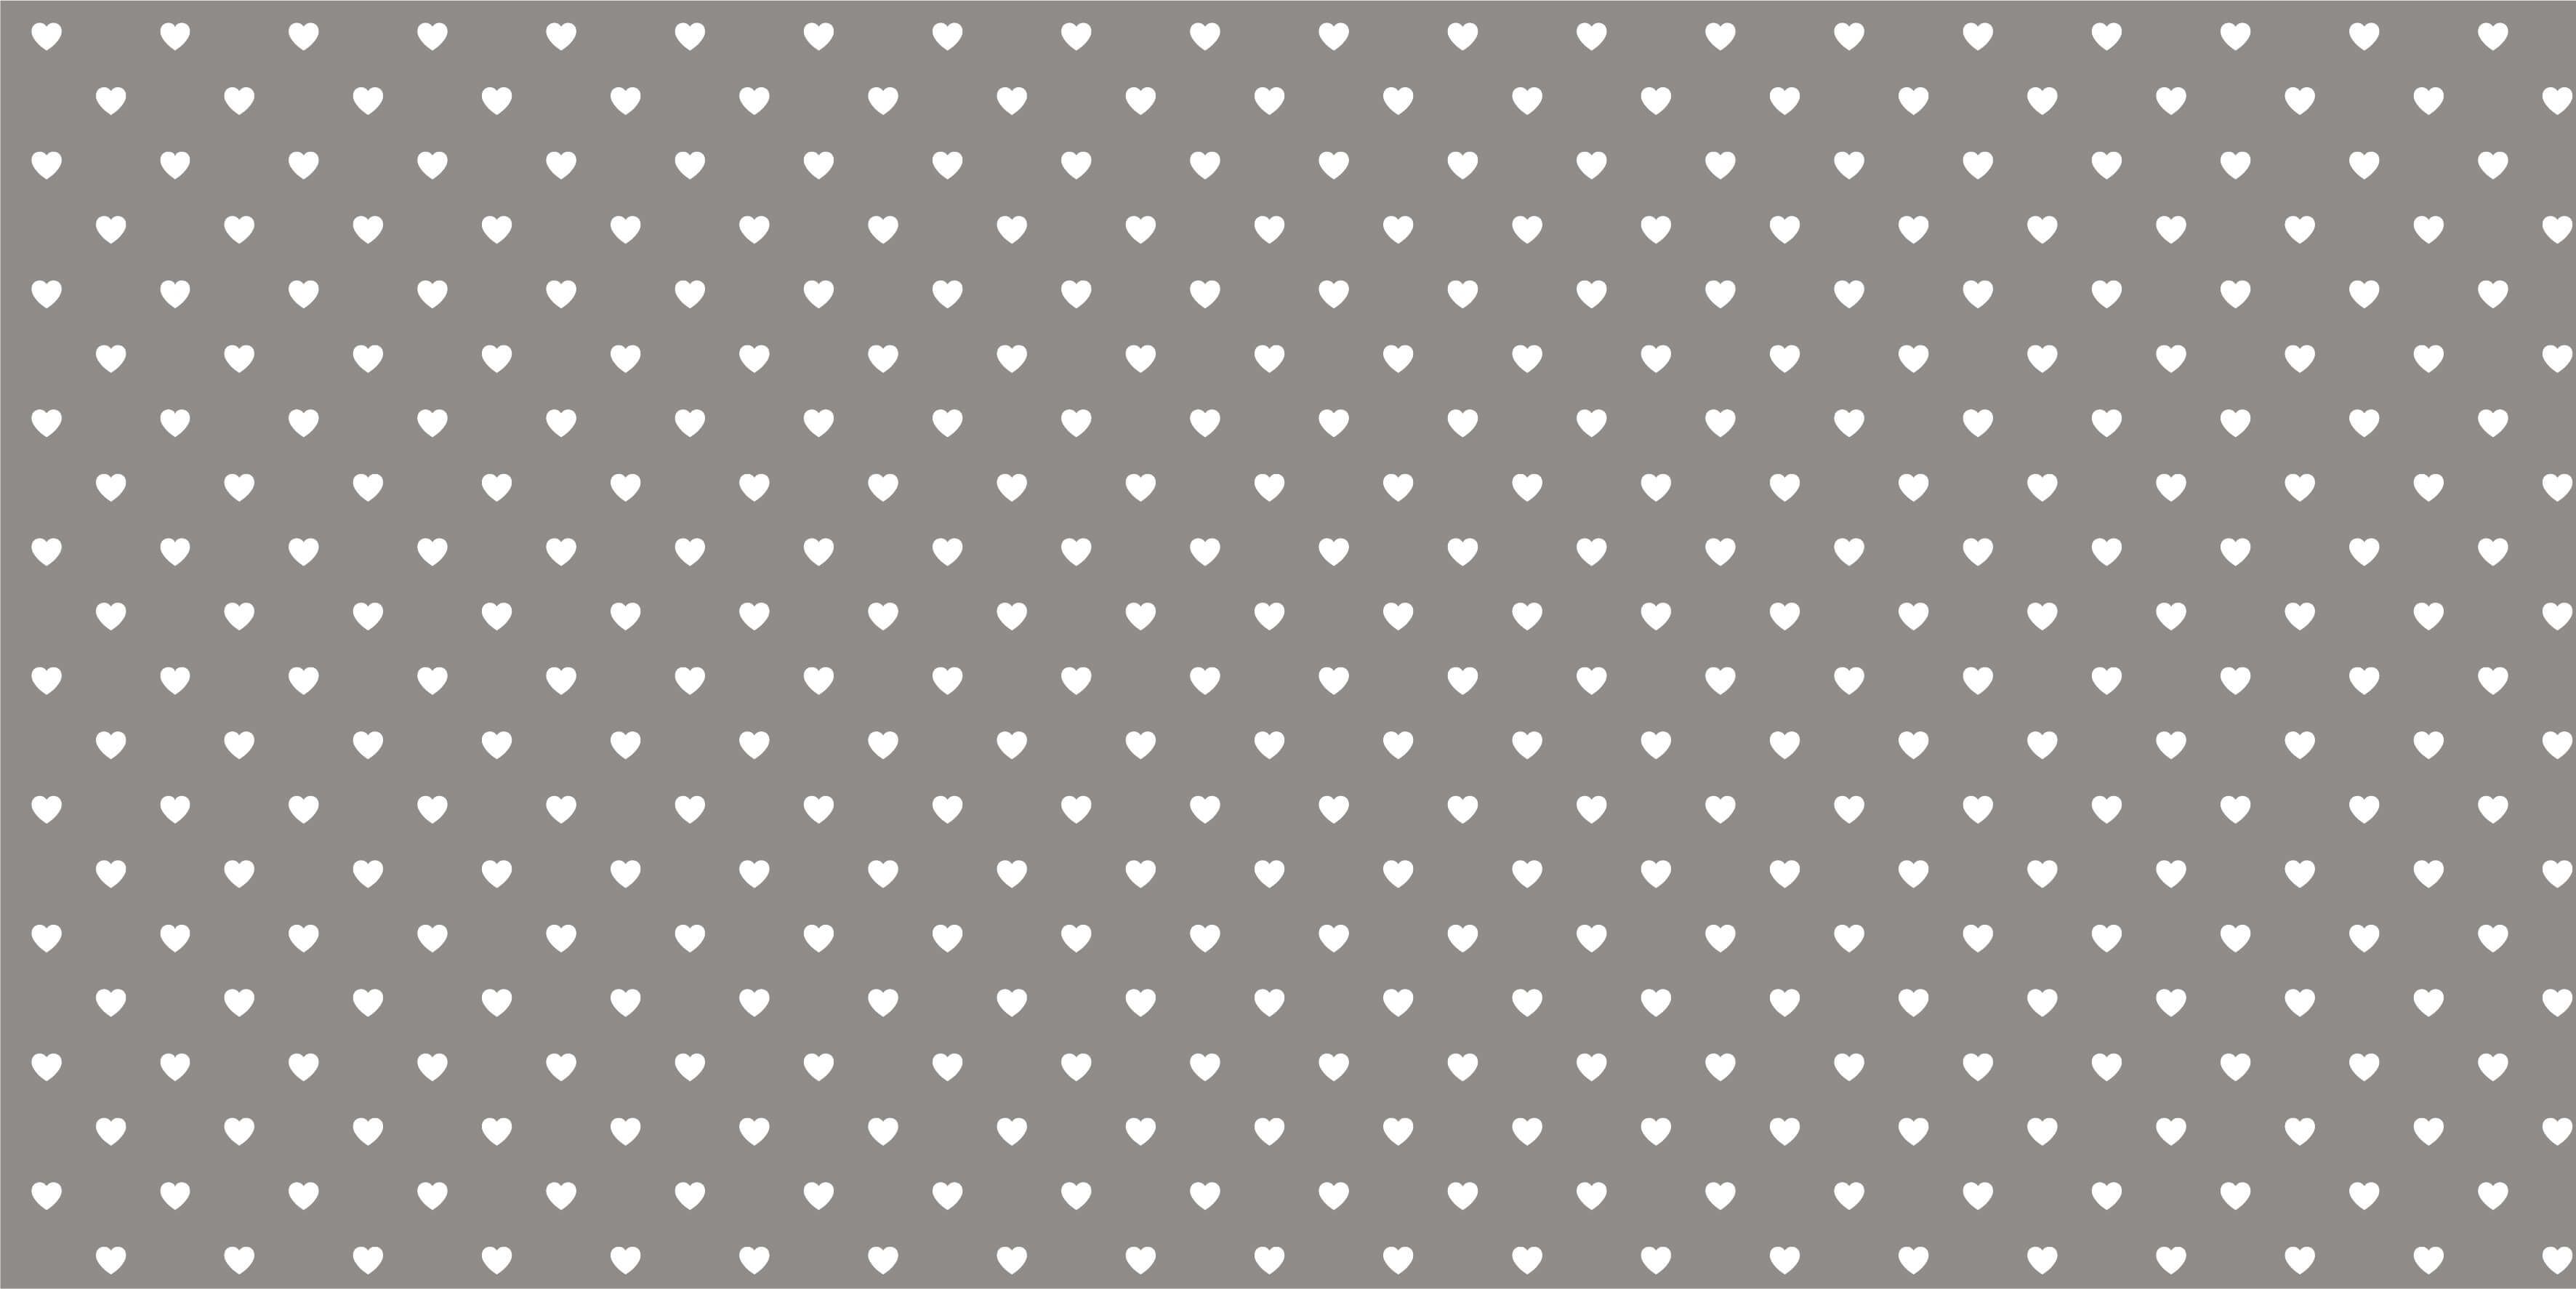 Baby wallpaper - Small white hearts - Baby room